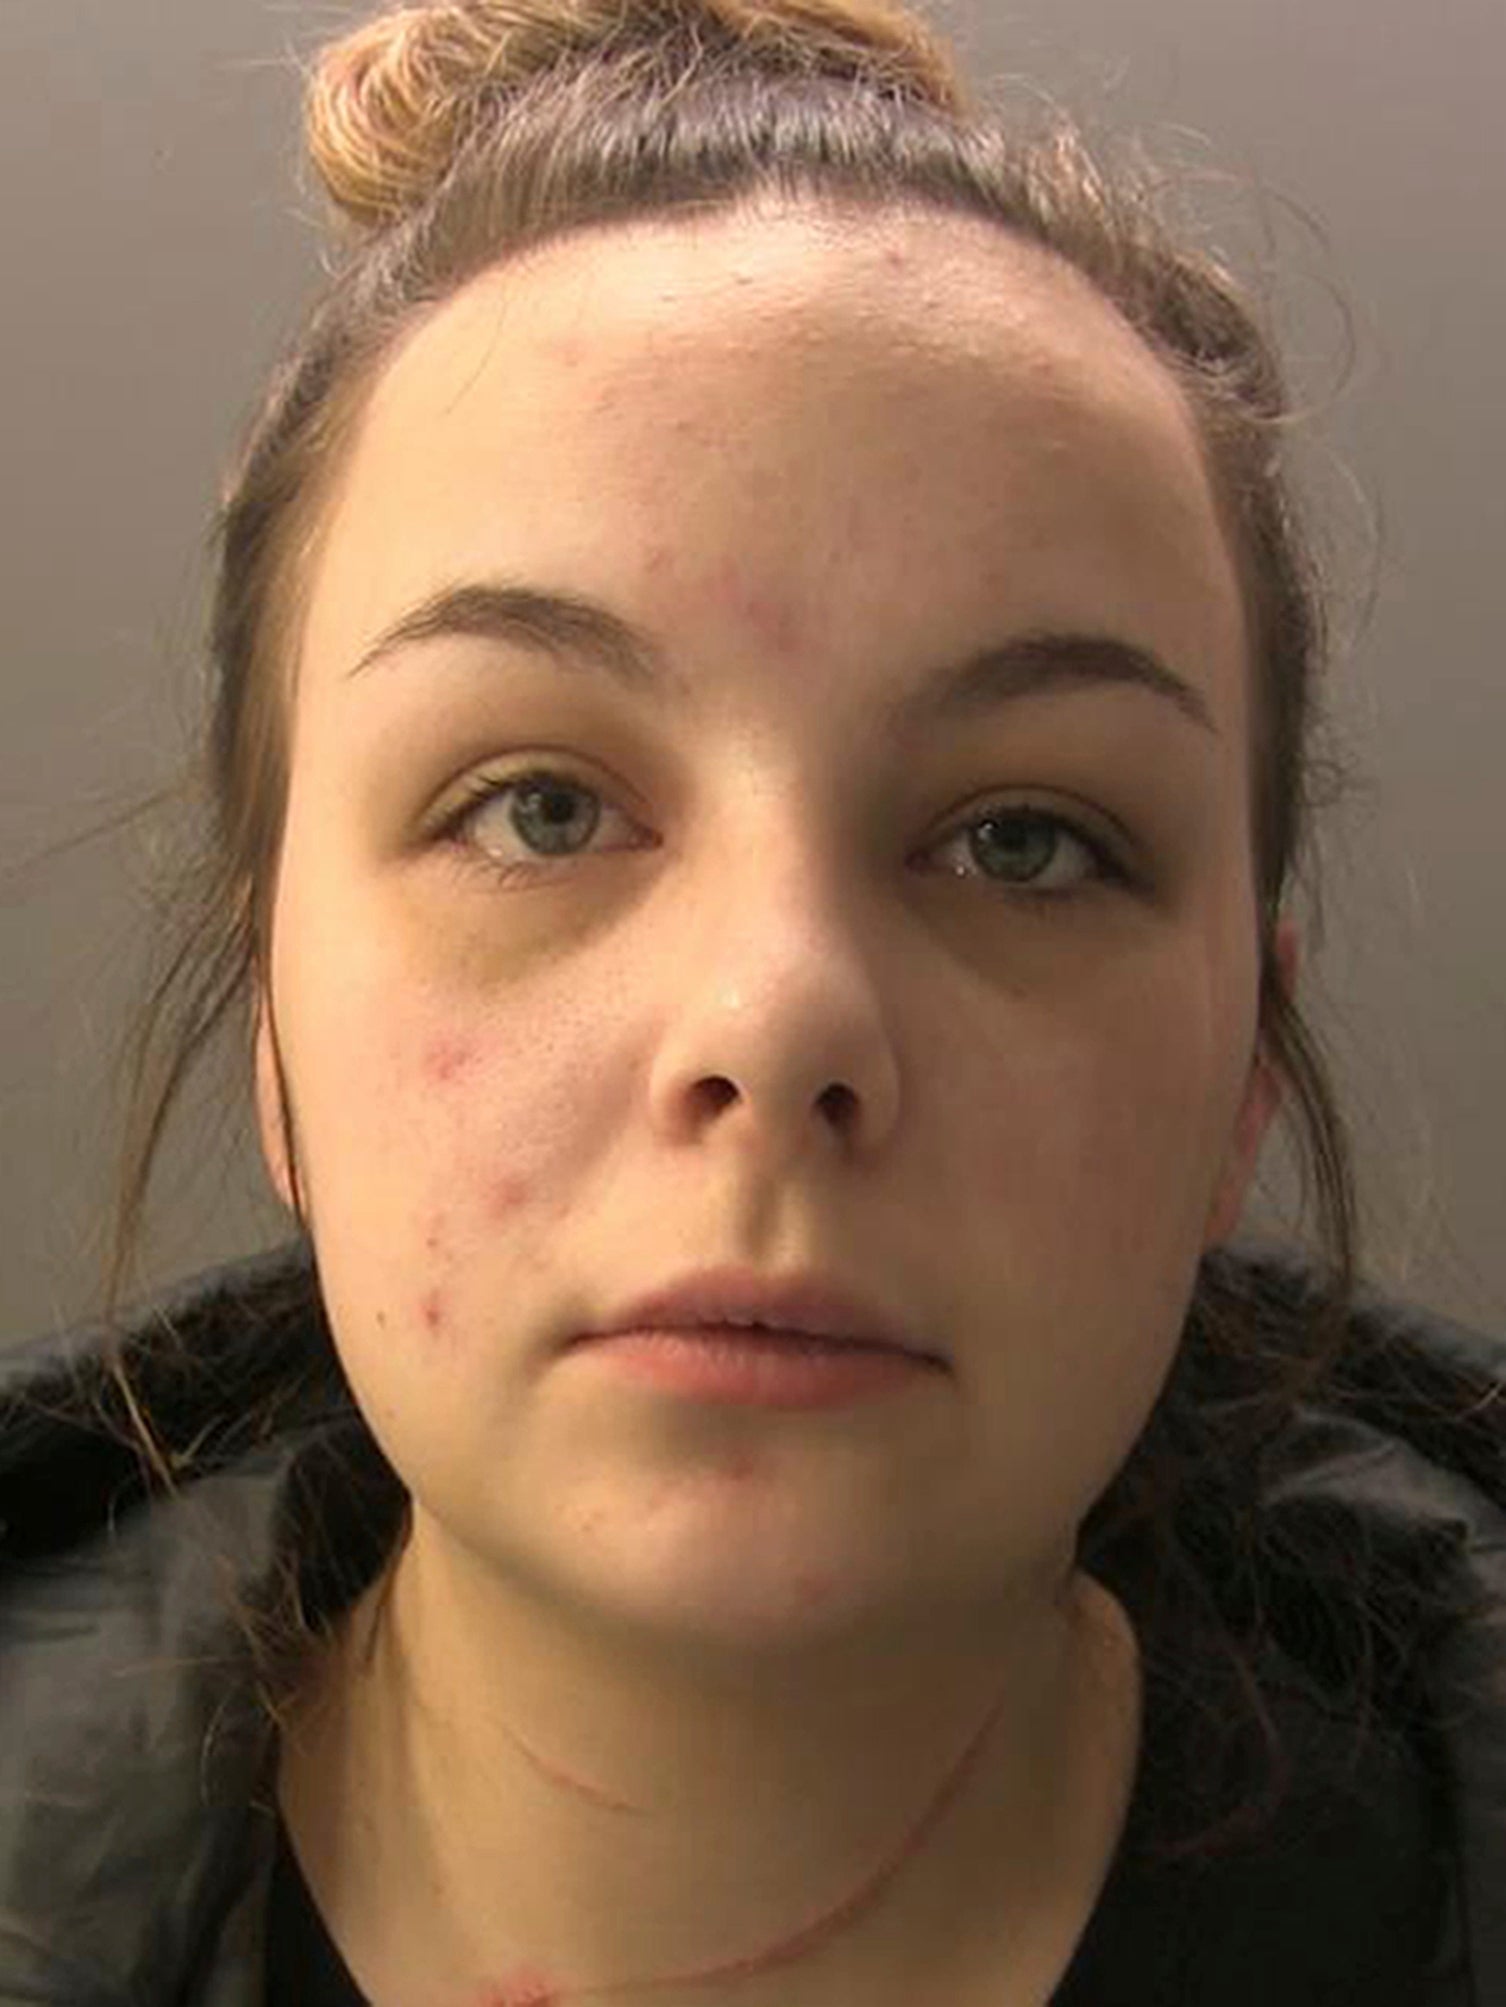 Fake sex abuse claims get British woman 8.5 year prison term The Independent photo picture